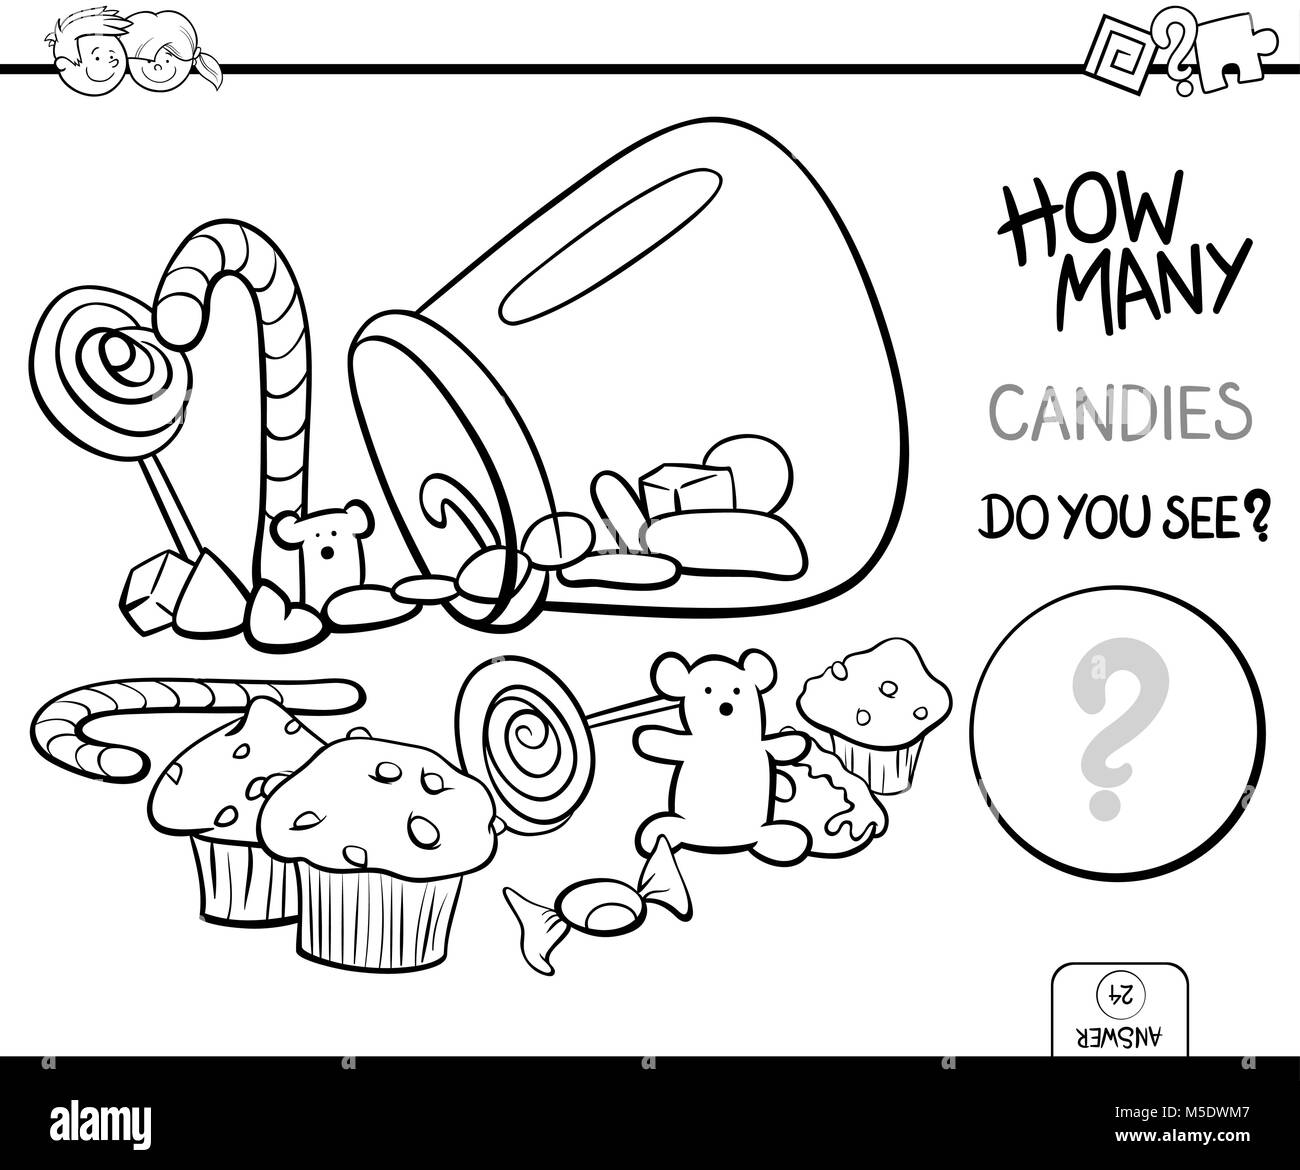 Black and White Cartoon Illustration of Educational Counting Activity Game for Children with Candies Coloring Book Stock Vector